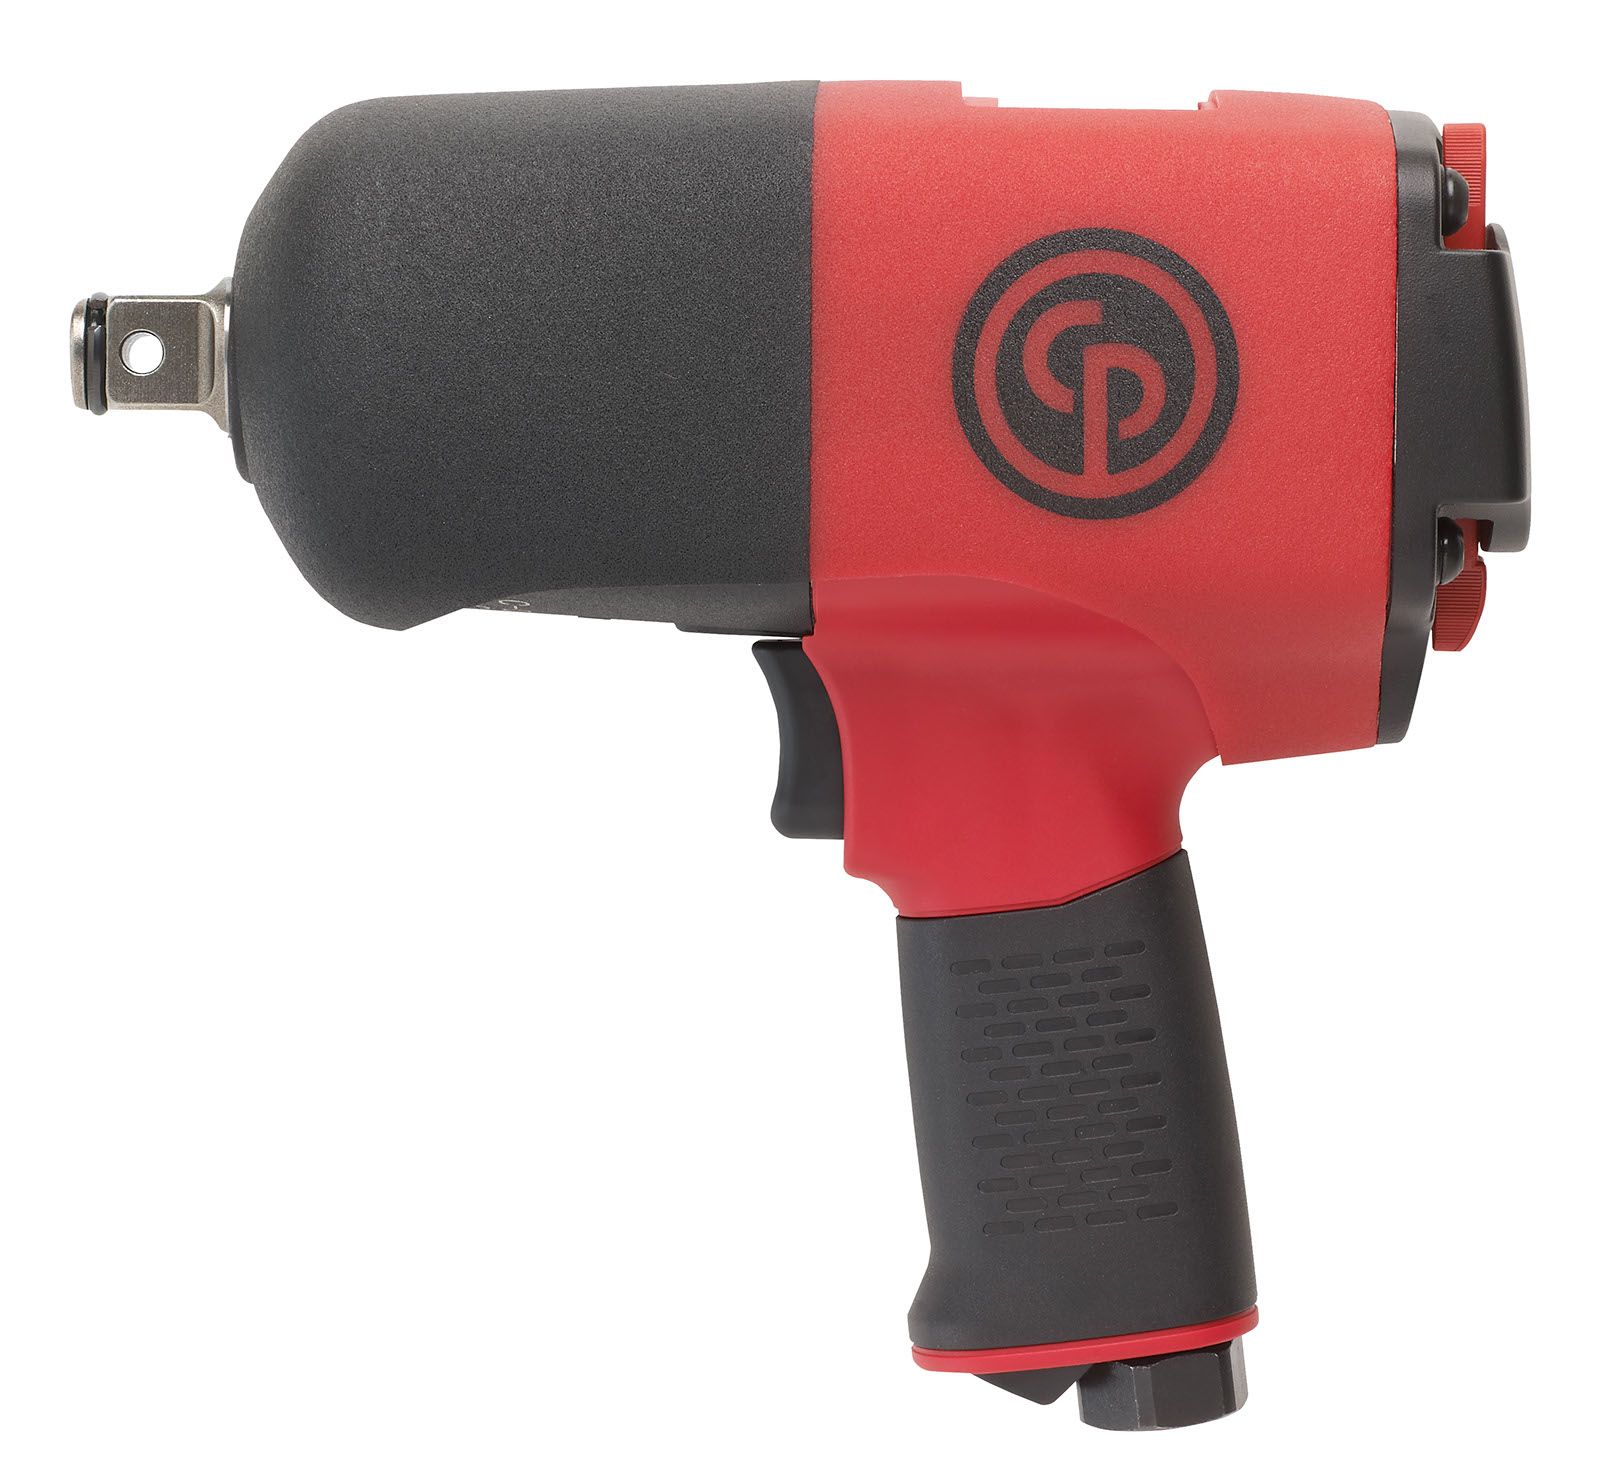 CP8272D+TUN UP KIT IMPACT WRENCH PROMO foto de producto